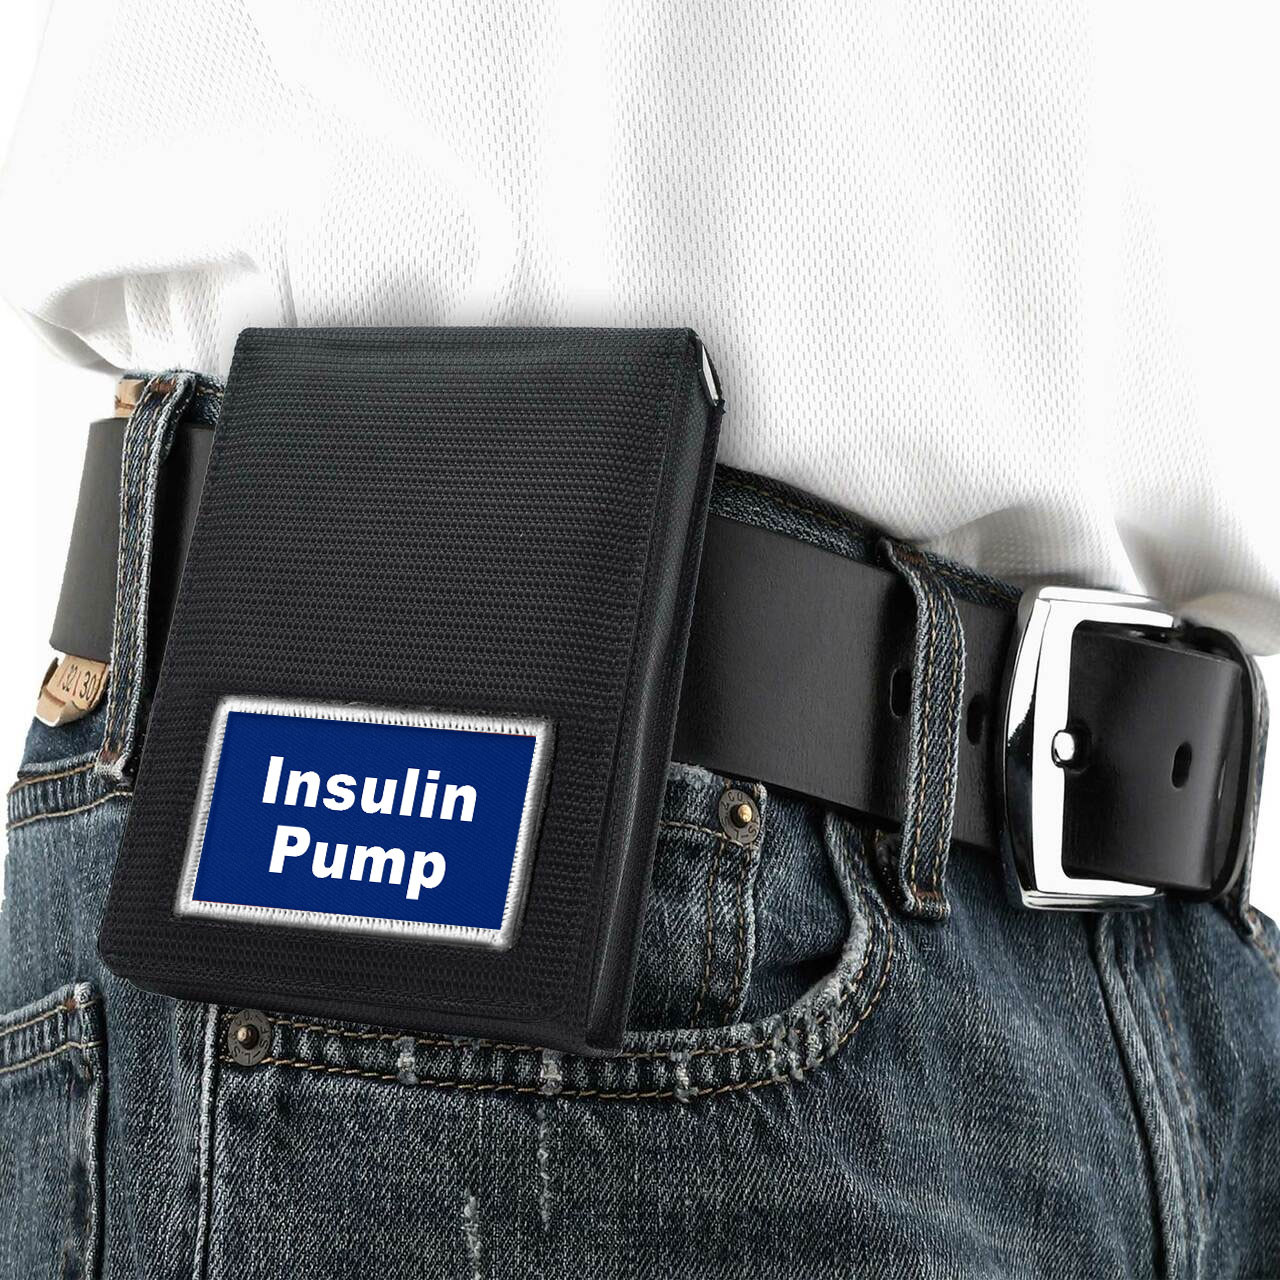 Insulin Pump Tactical Holster for the Glock 26